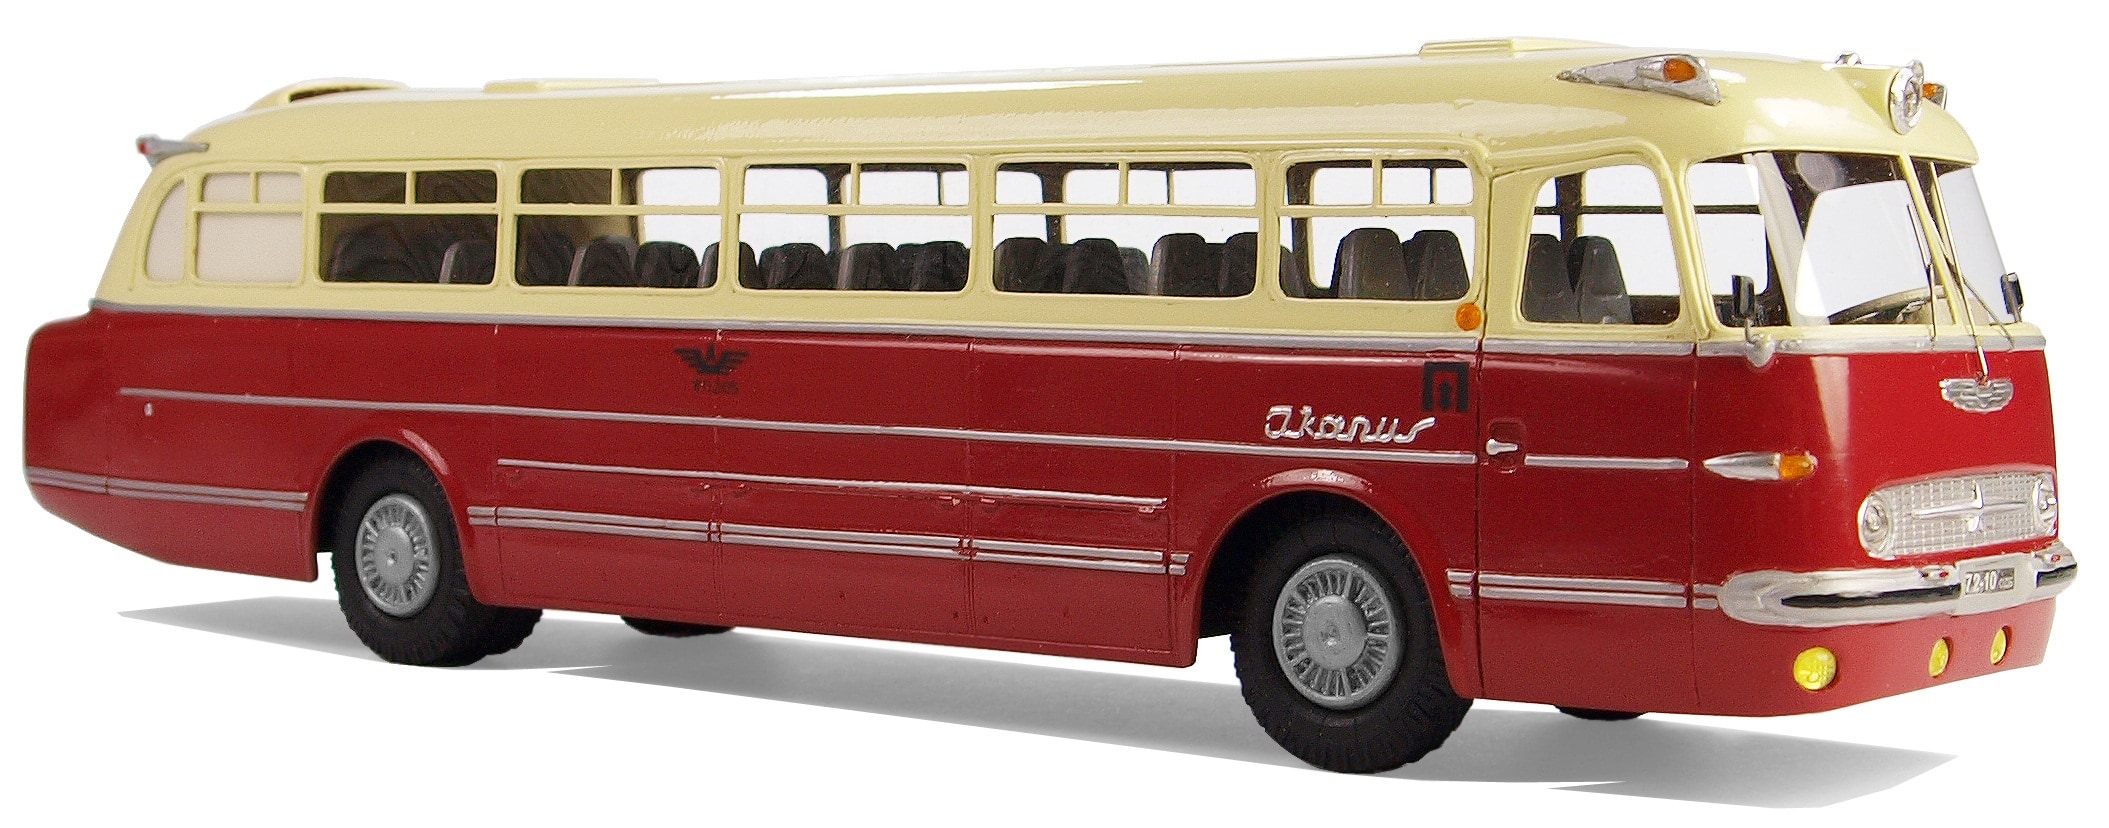 Collect, Leisure, Ominbusse, Ikarus 55, red, transportation